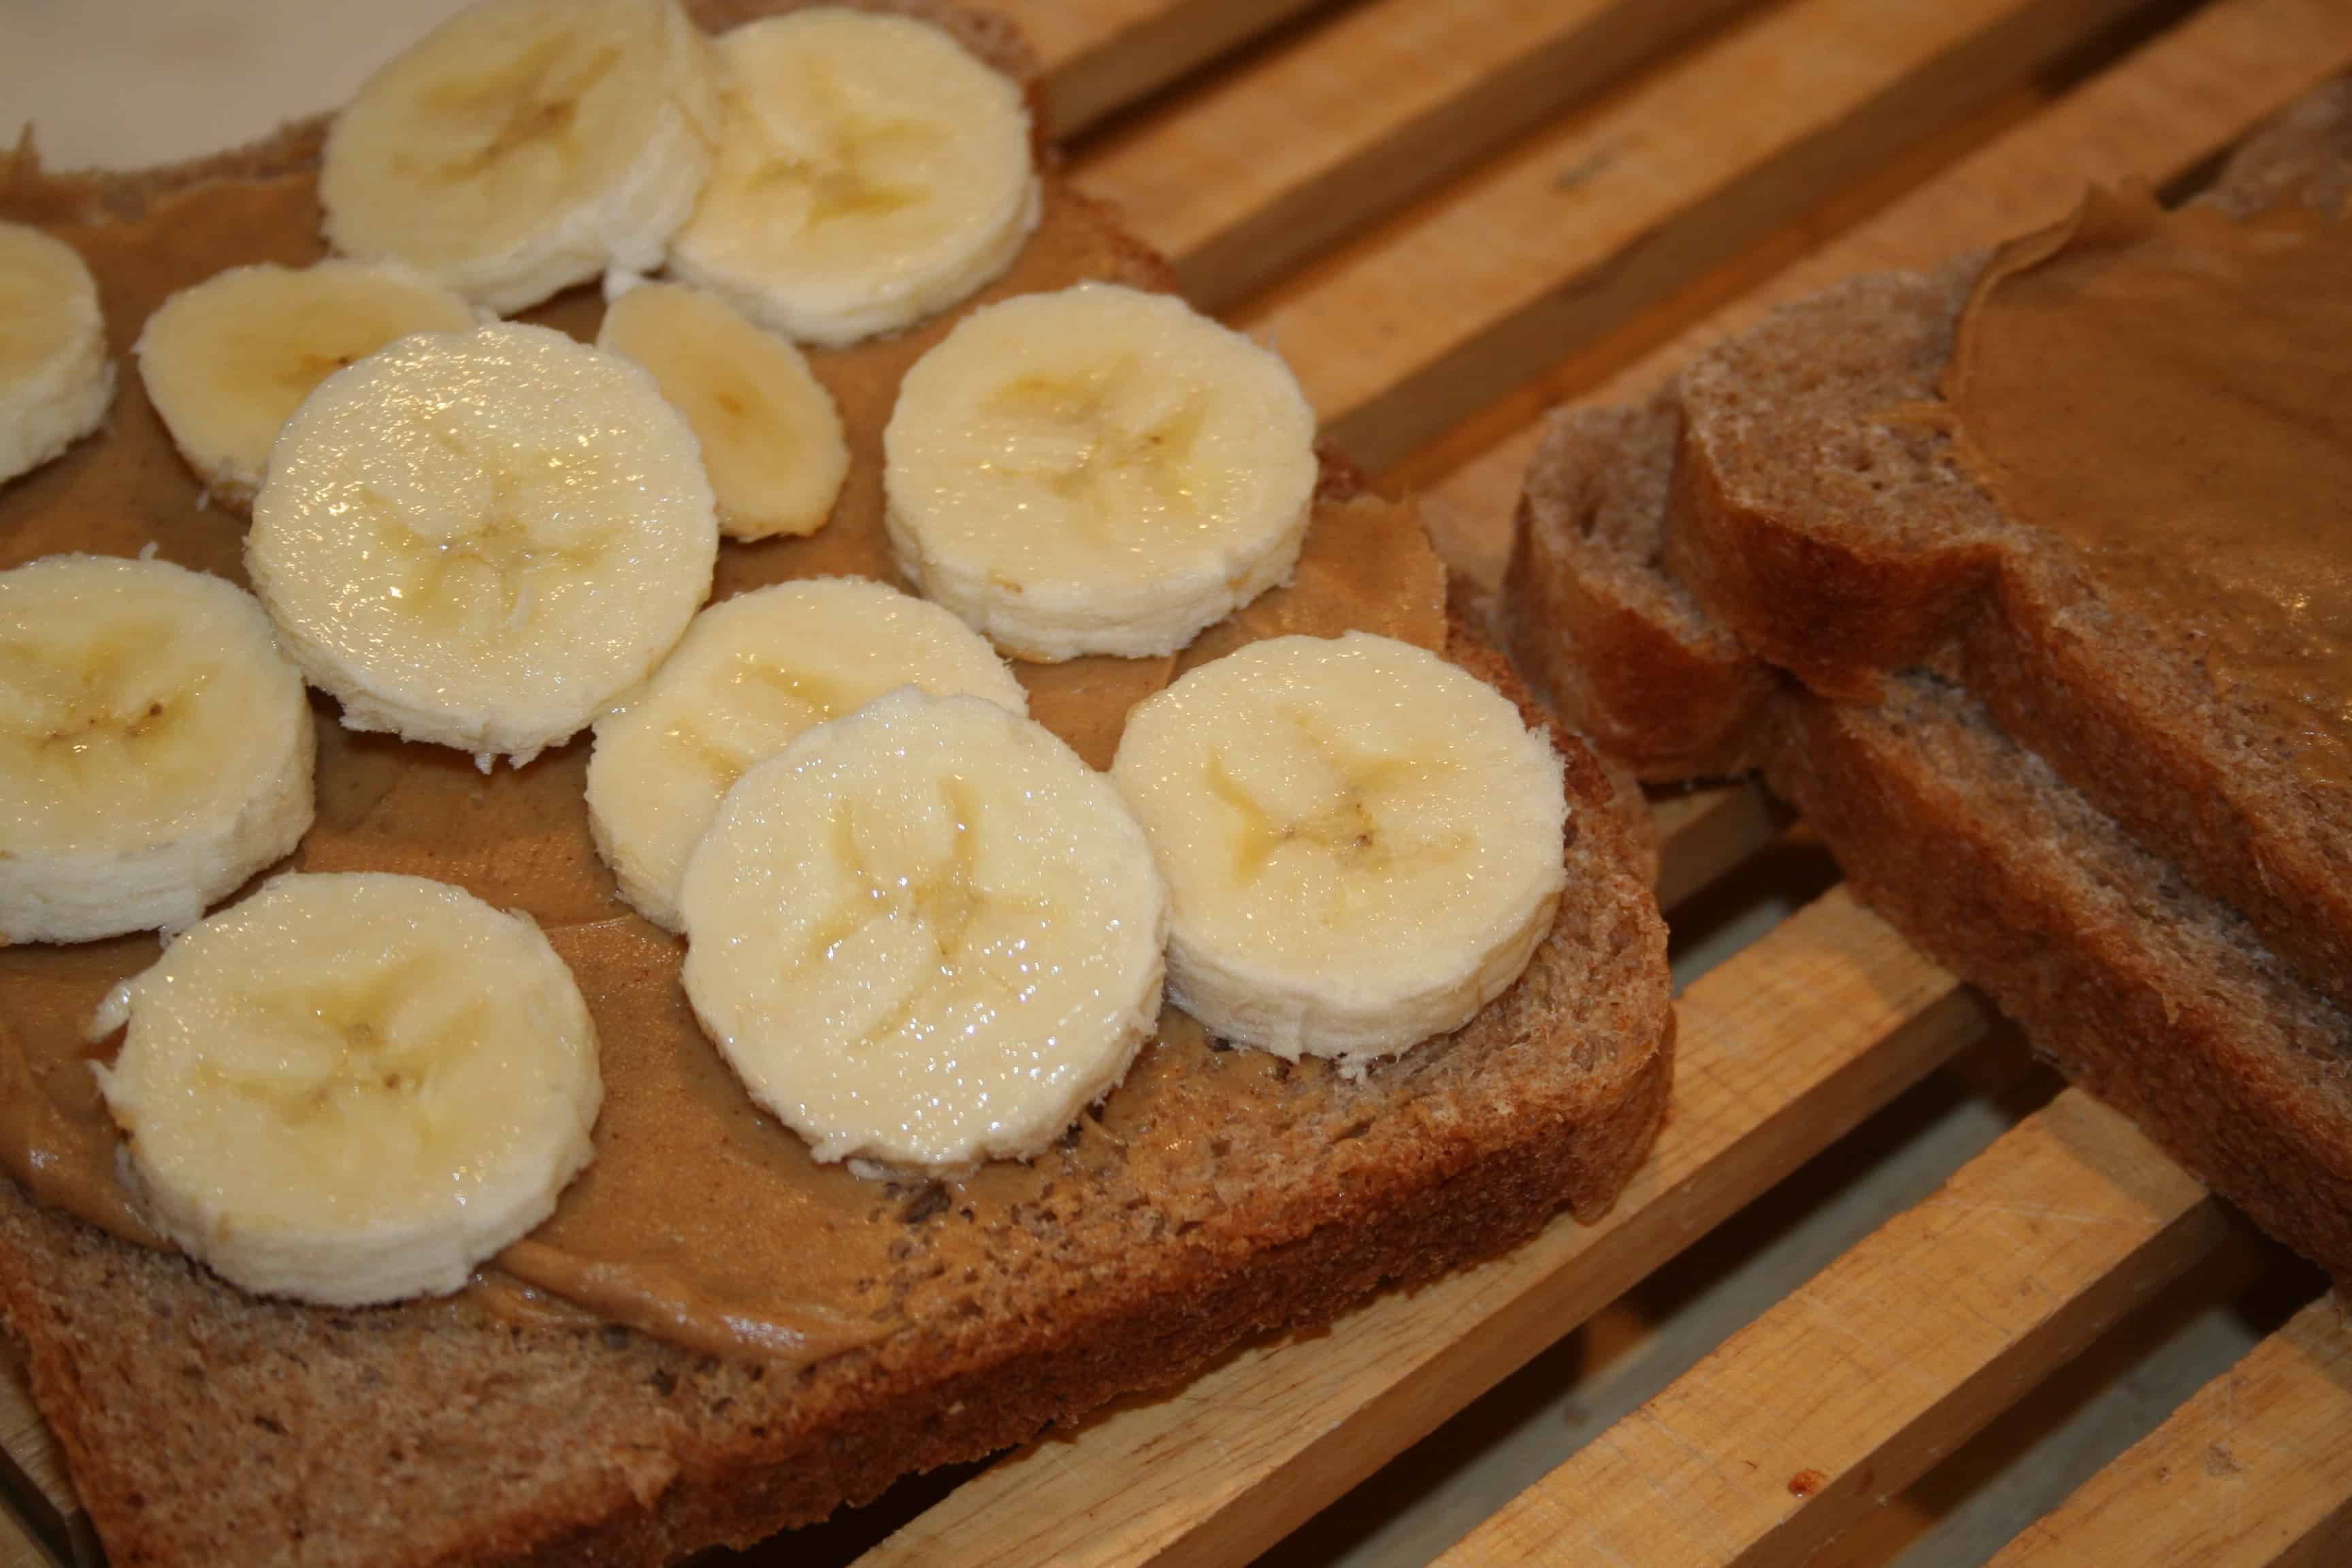 No egg breakfast: peanut butter toast with banana slices